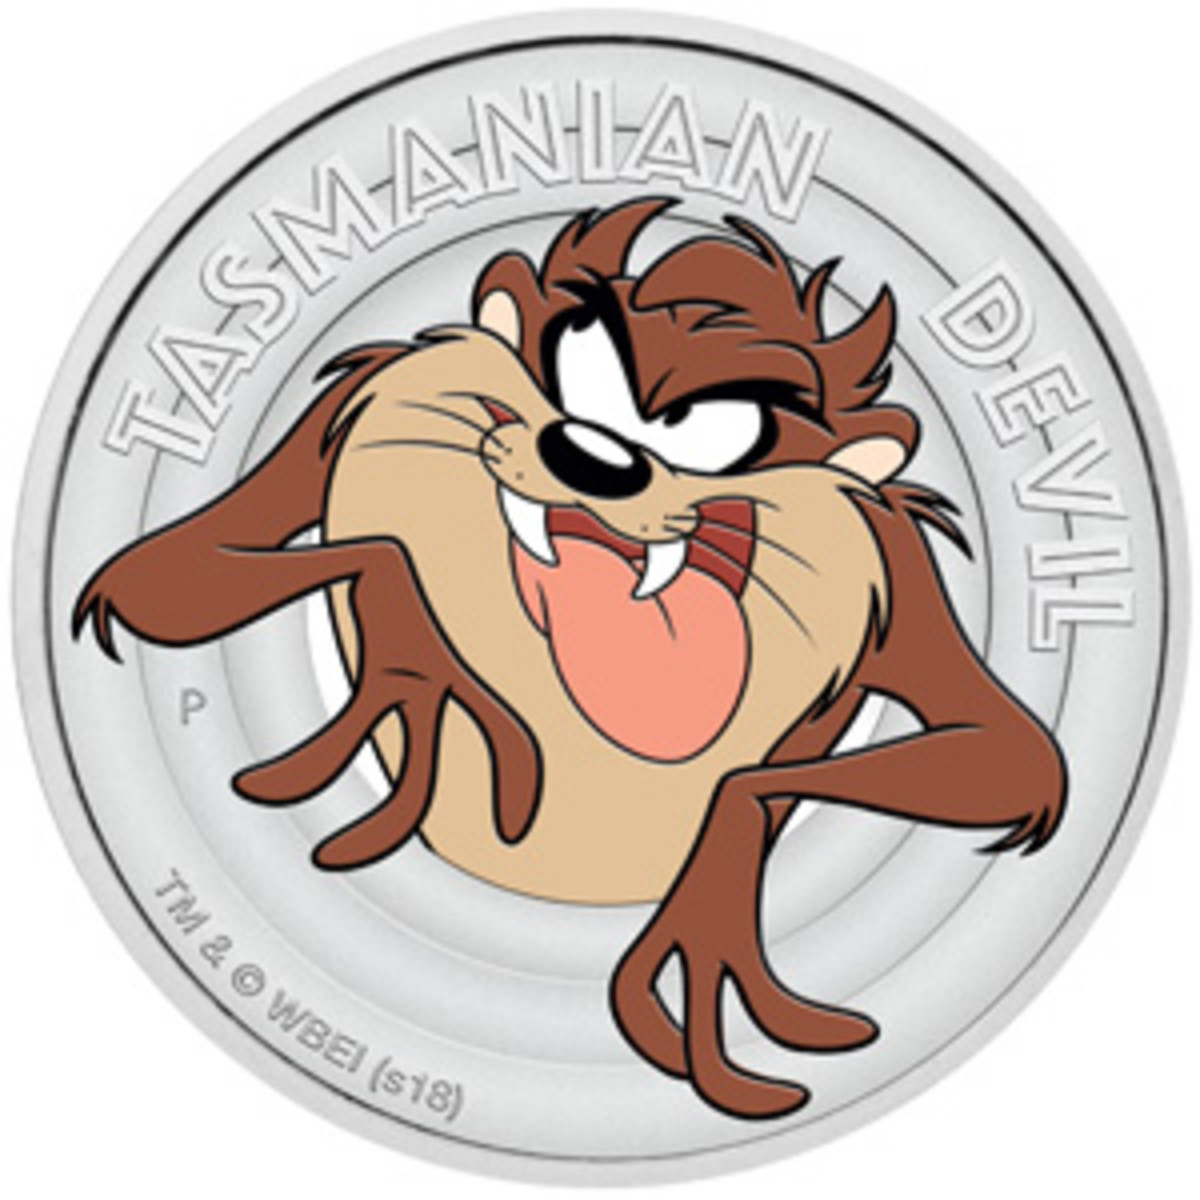  Looney Tunes’ Taz features on a Tuvaluan silver 50 cents, the fifth coin and last coin in this series. (Image courtesy The Perth Mint: TM & © WBEI [s18])